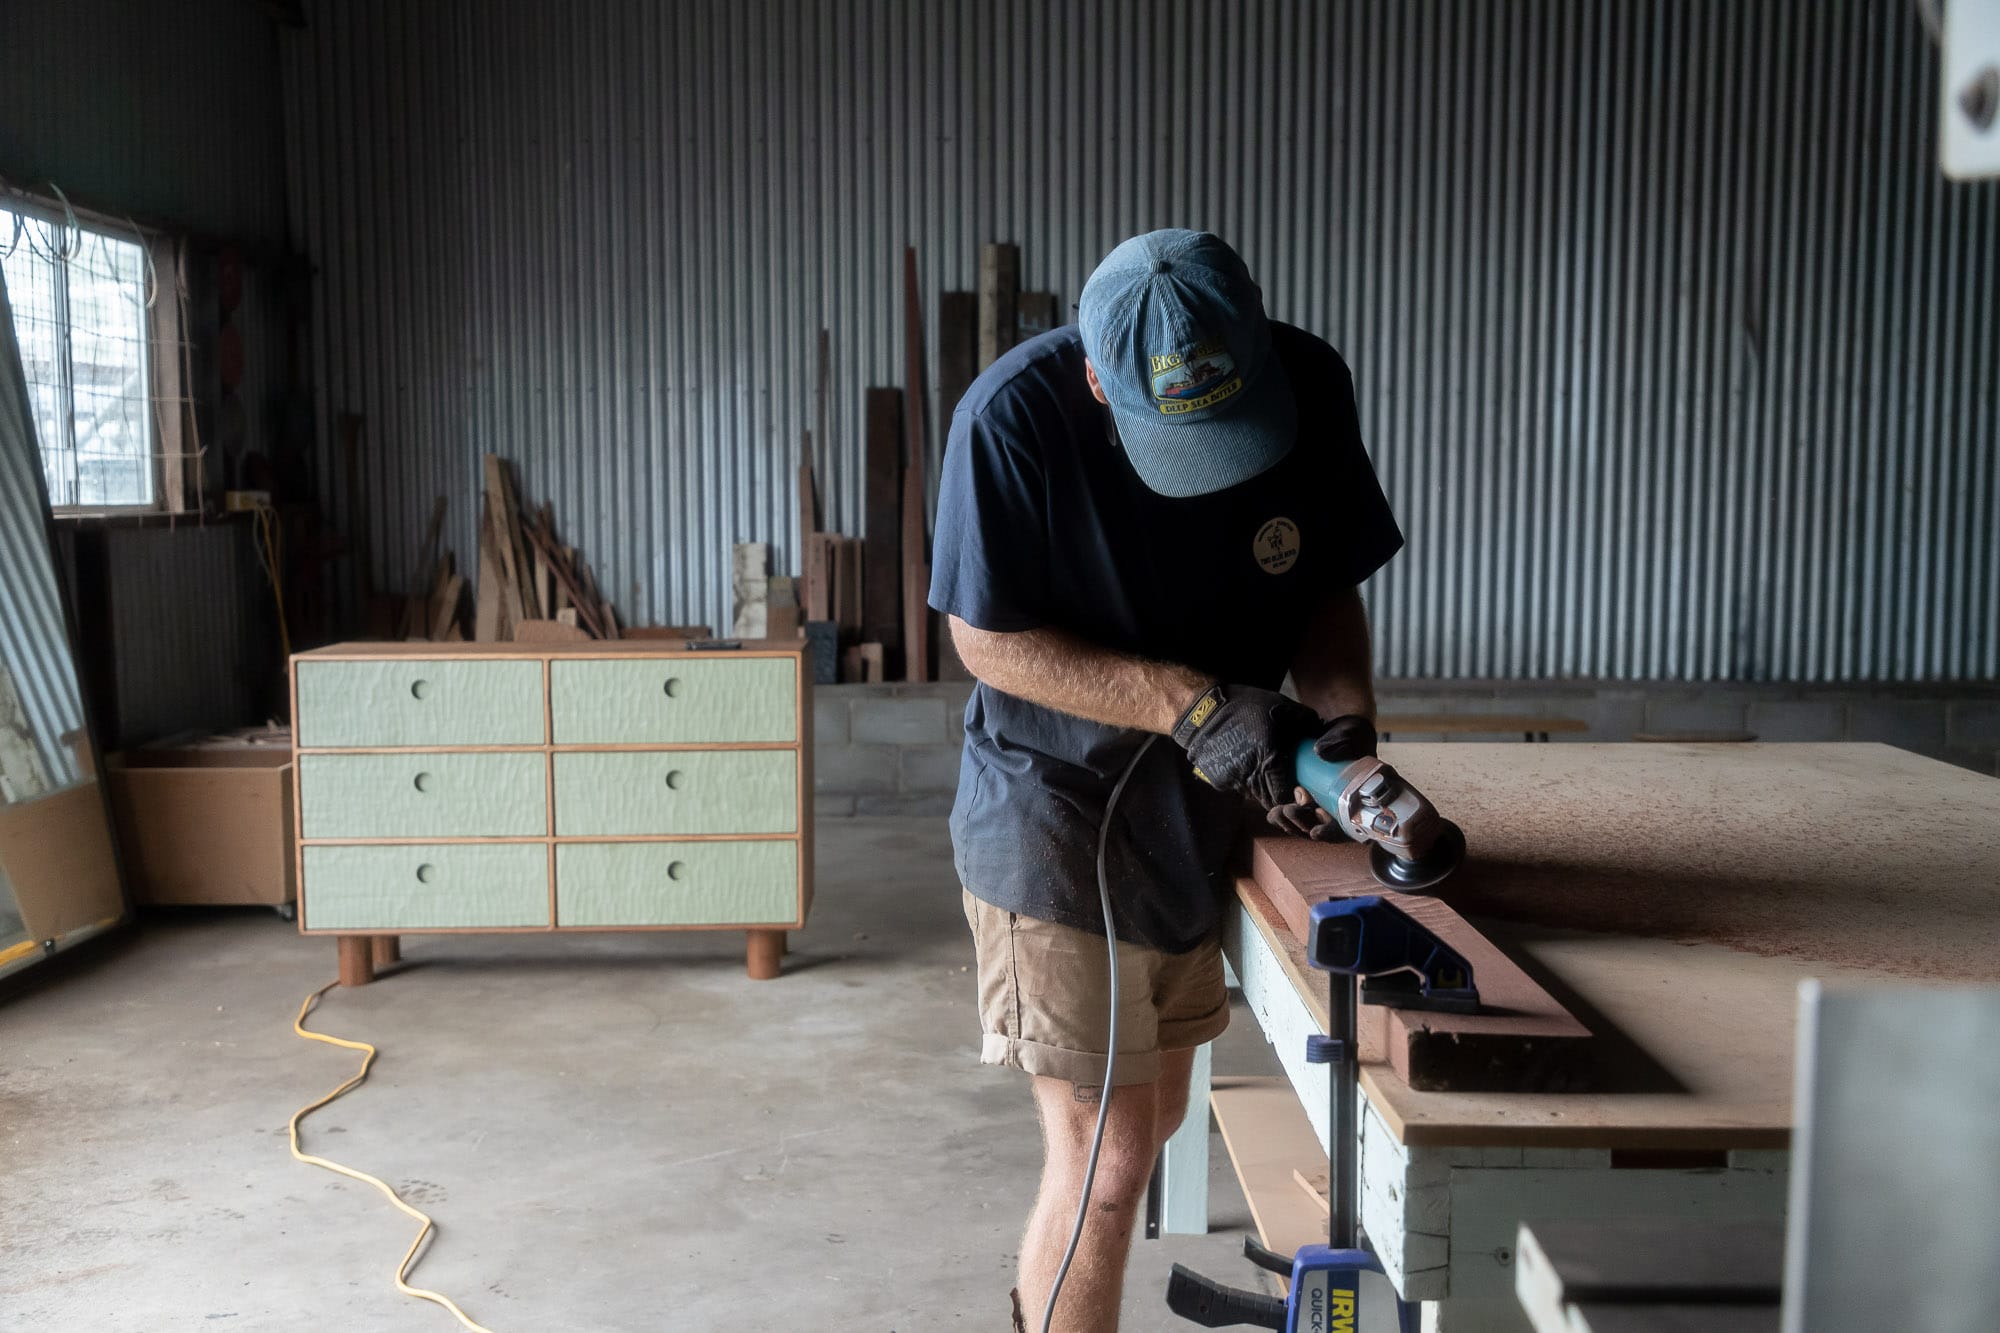 Two Blue Boys. Copyright of Two Blue Boys. Man uses electronic tool on piece of timber in a workshop. Timber and seafoam coloured sideboard in background. 